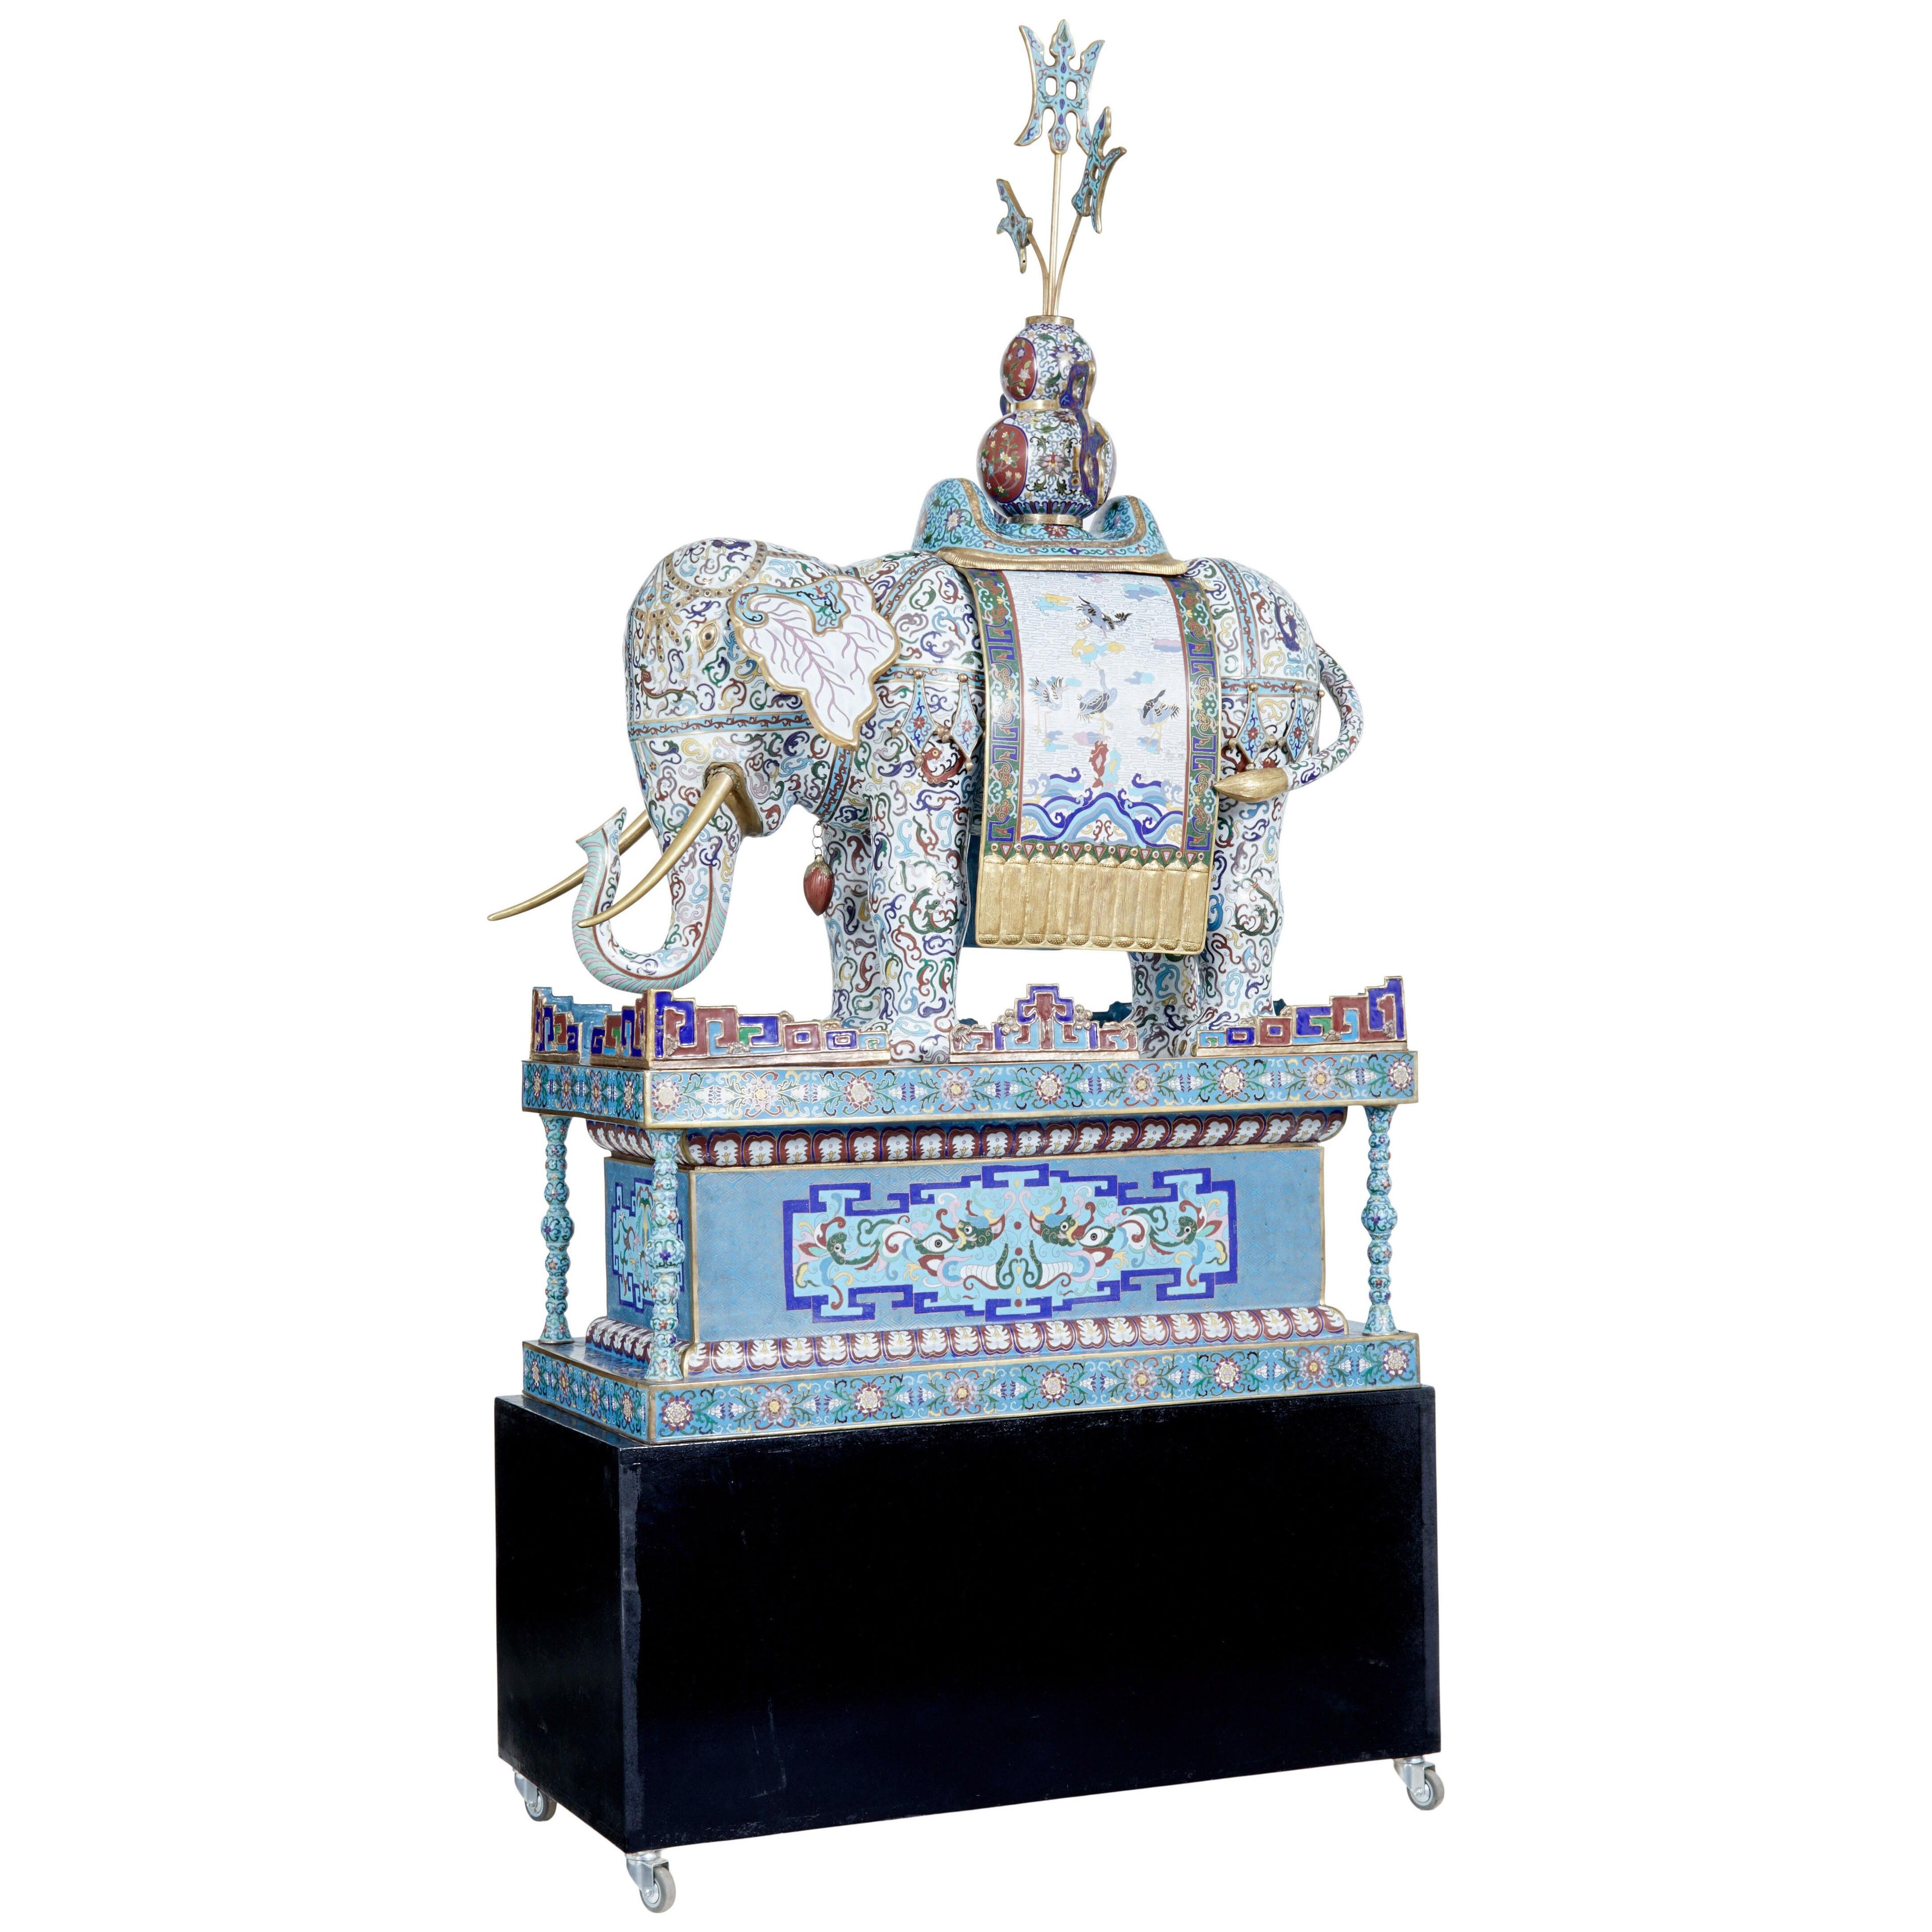 EARLY 20TH CENTURY LARGE CHINESE CLOISONNE ENAMEL ELEPHANT ON STAND